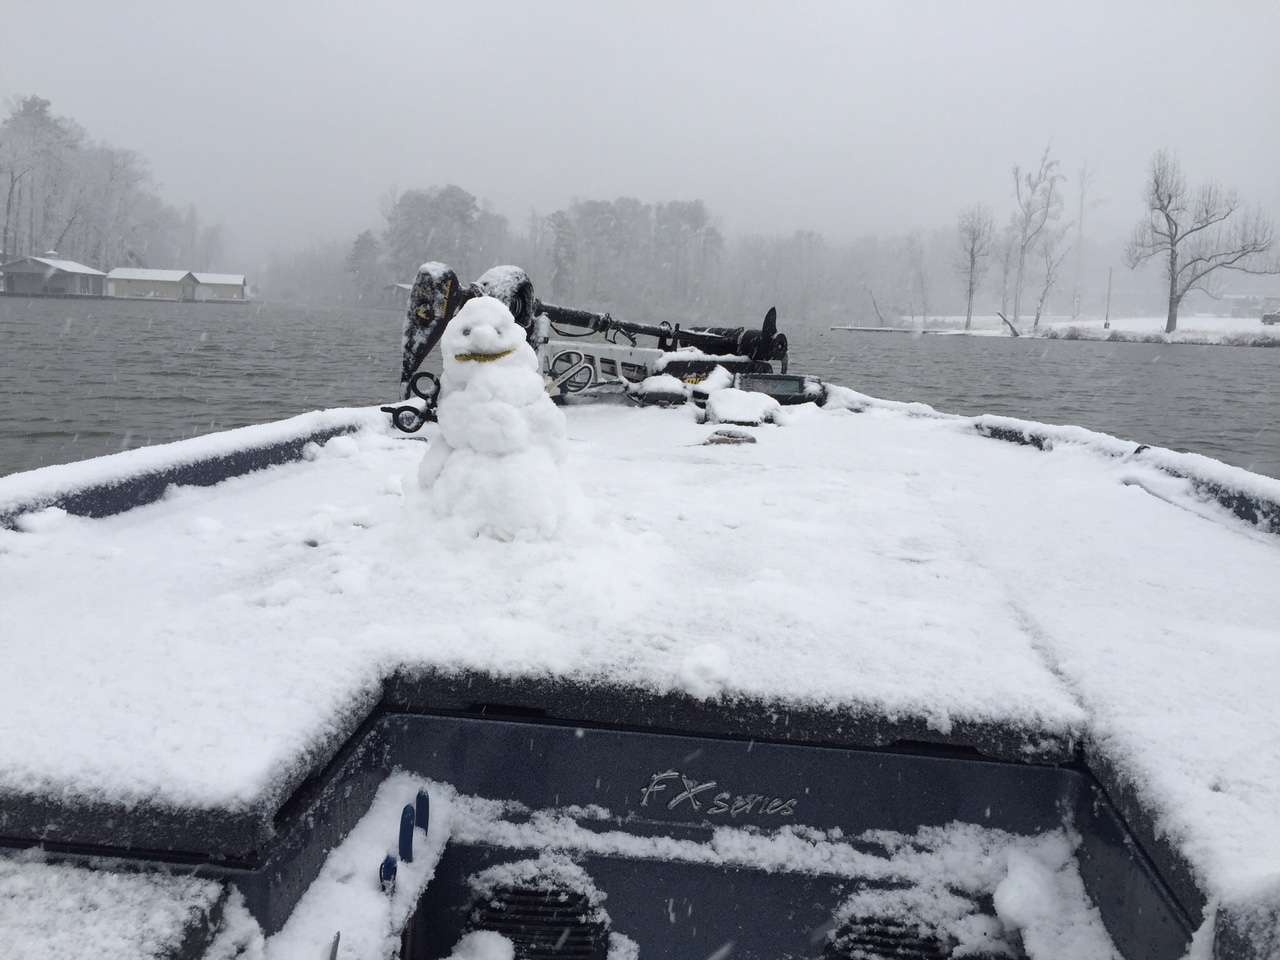 ... in snow. So one must build a snowman on one's boat.